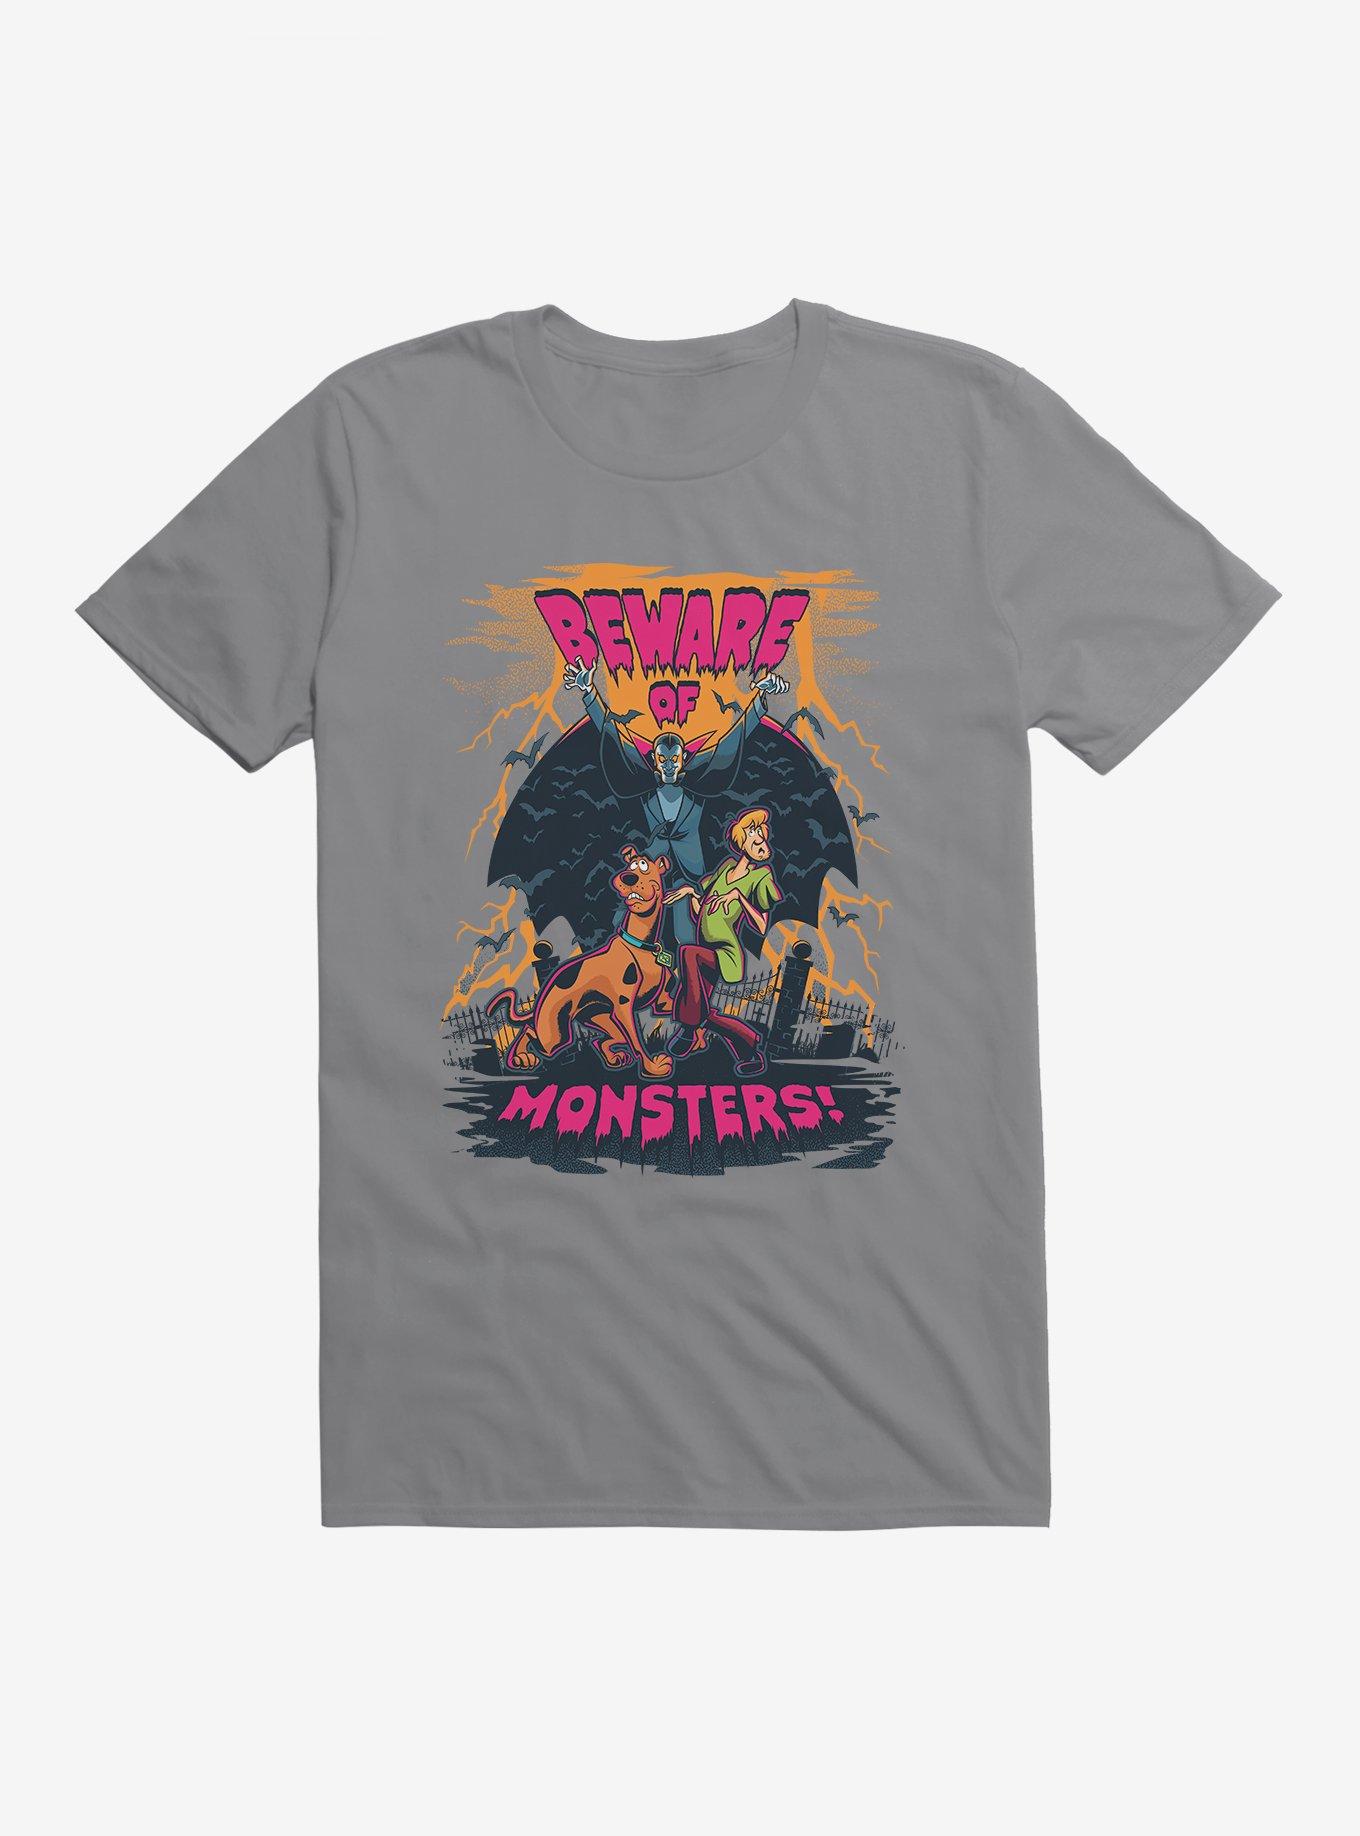 Scooby-Doo Beware Of Vampire Monsters! Shaggy And Scooby T-Shirt | Hot ...